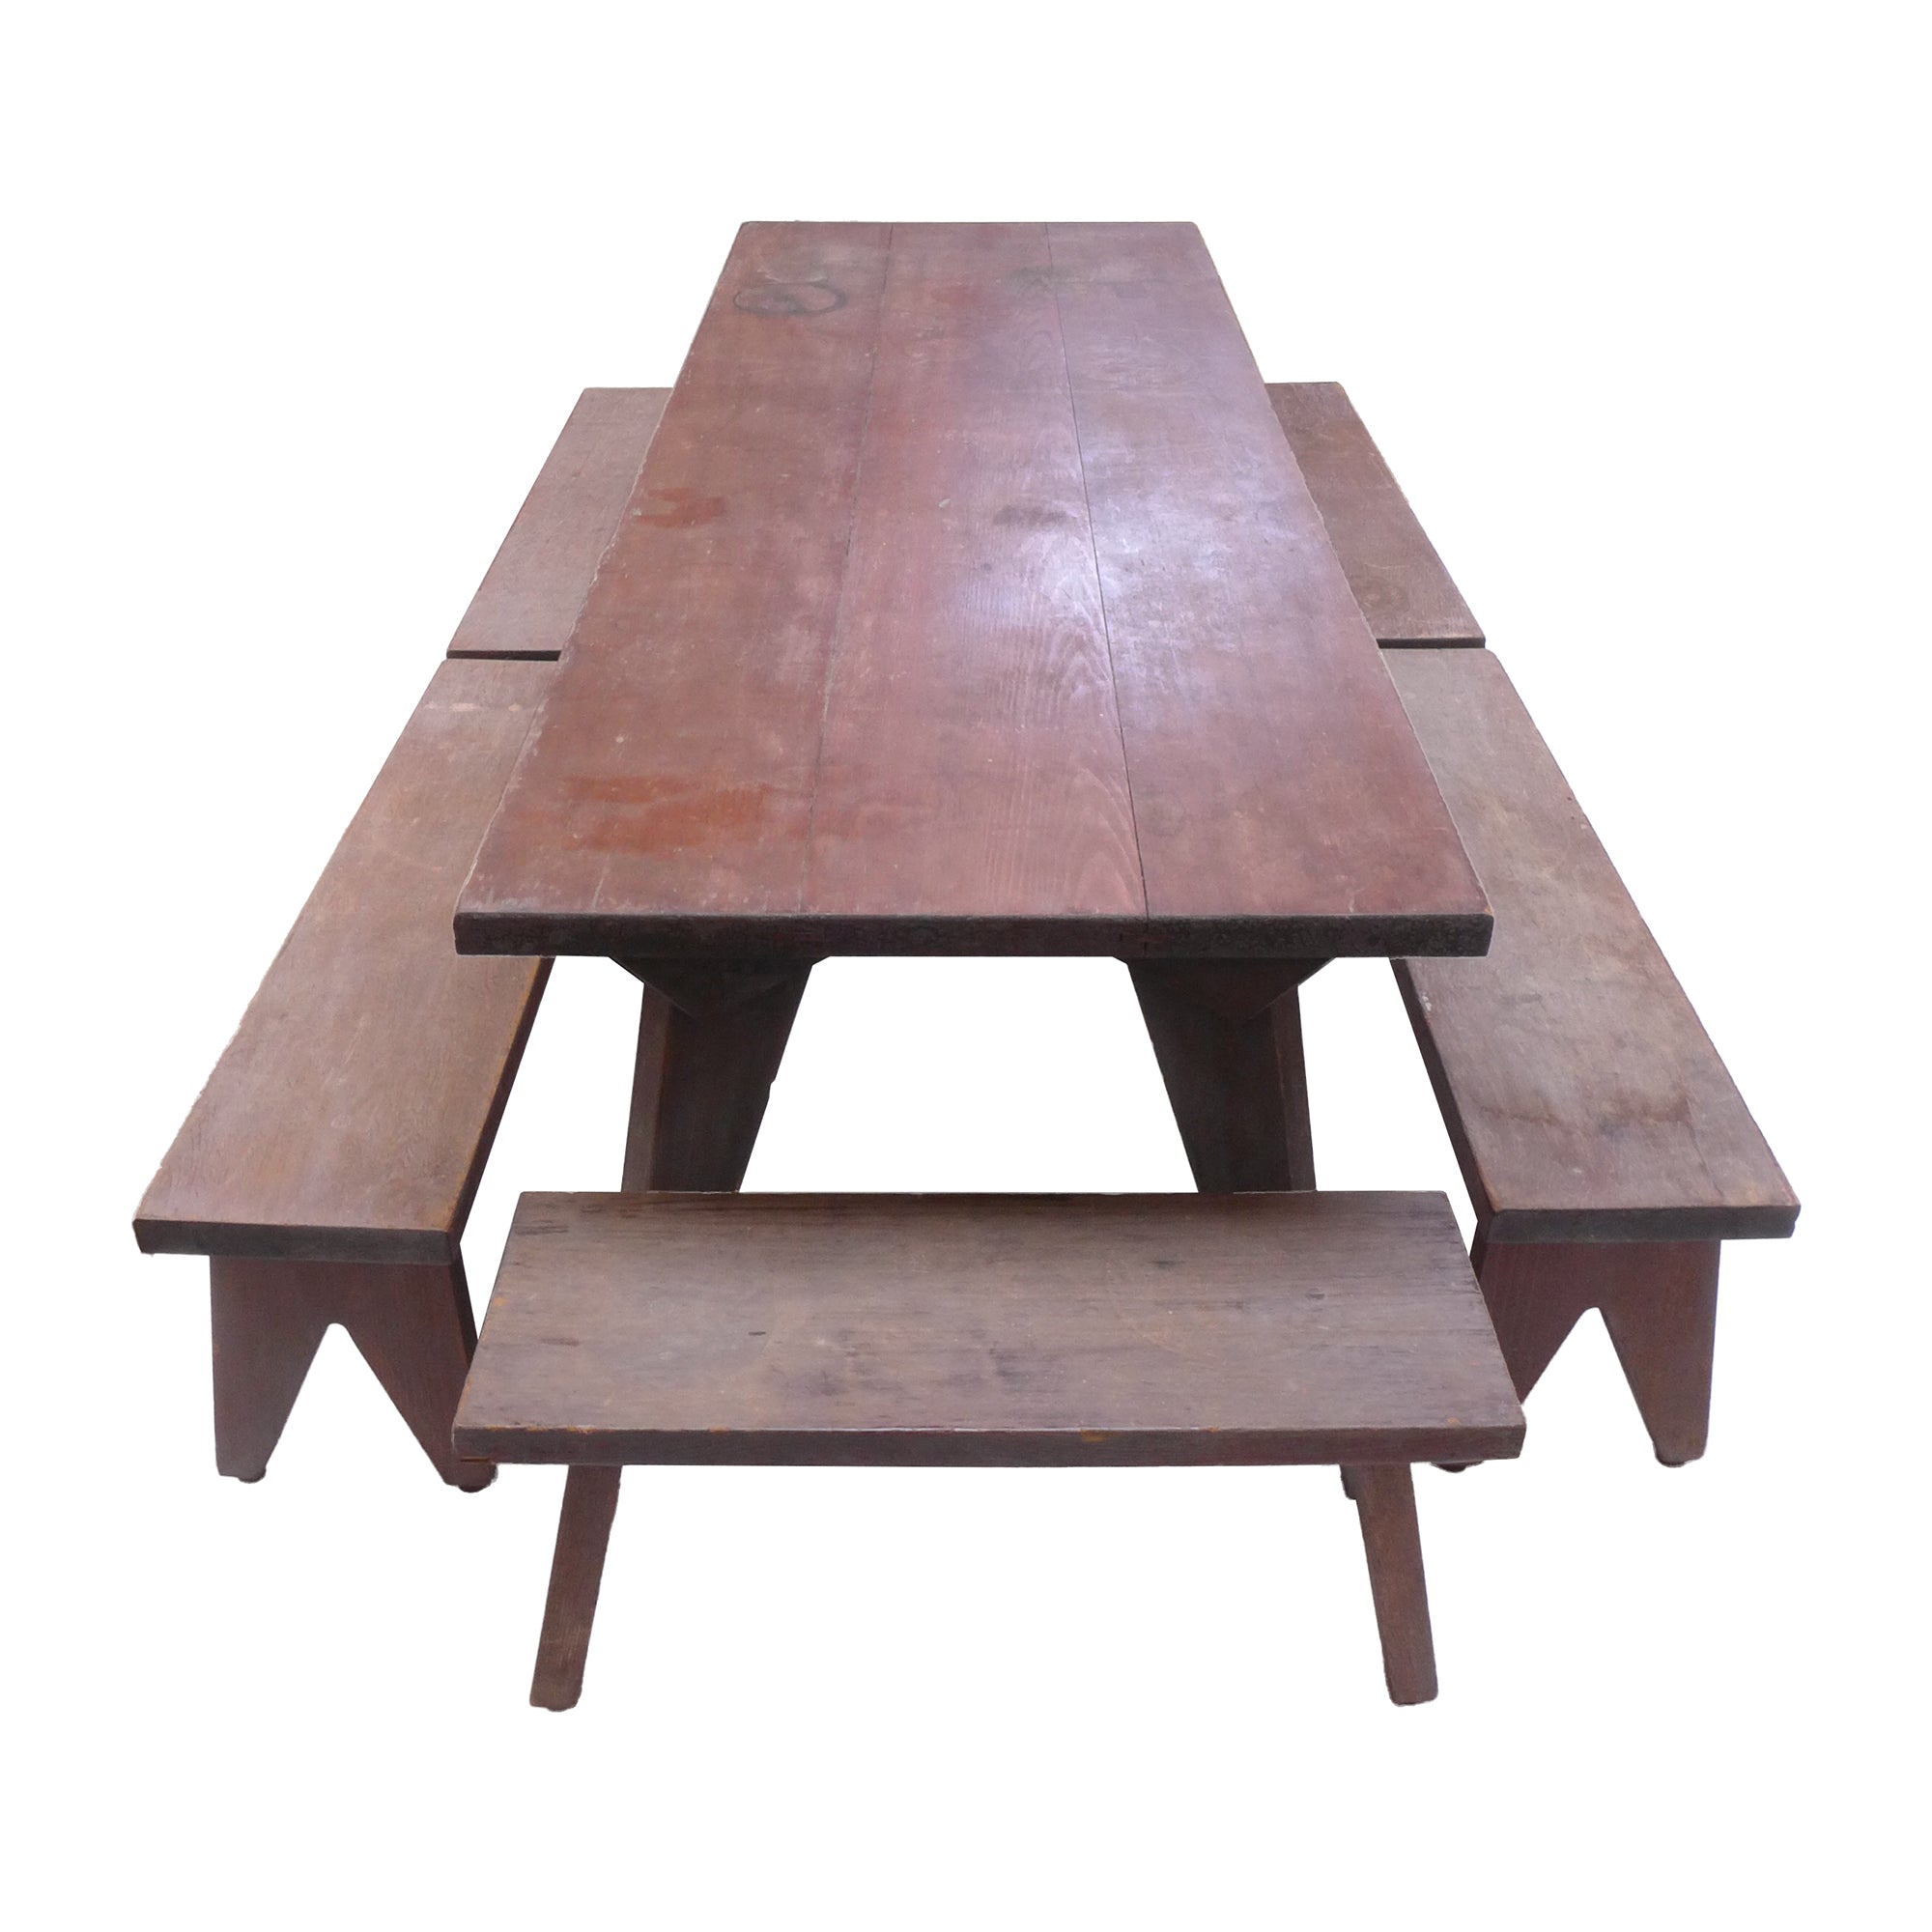 Modernist Outdoor Redwood Dining Table & Benches Set